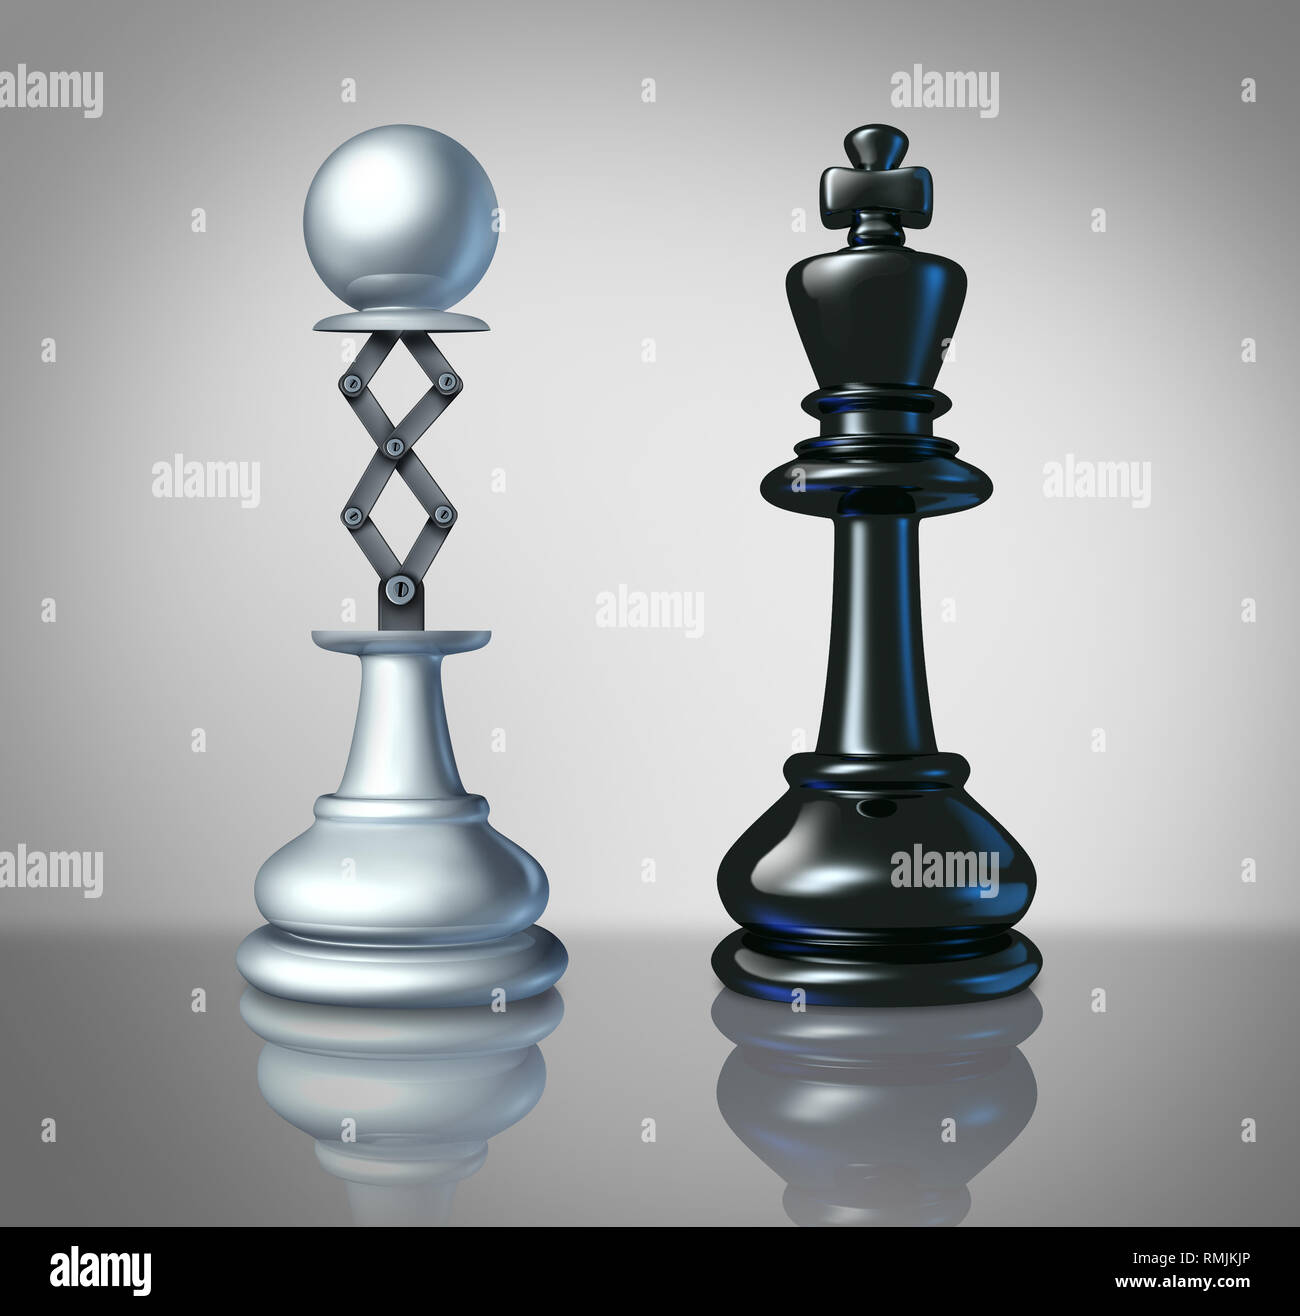 Measuring up to the competition as a business success concept as a chess pawn lifting up to compete with a king as a leadership symbol. Stock Photo